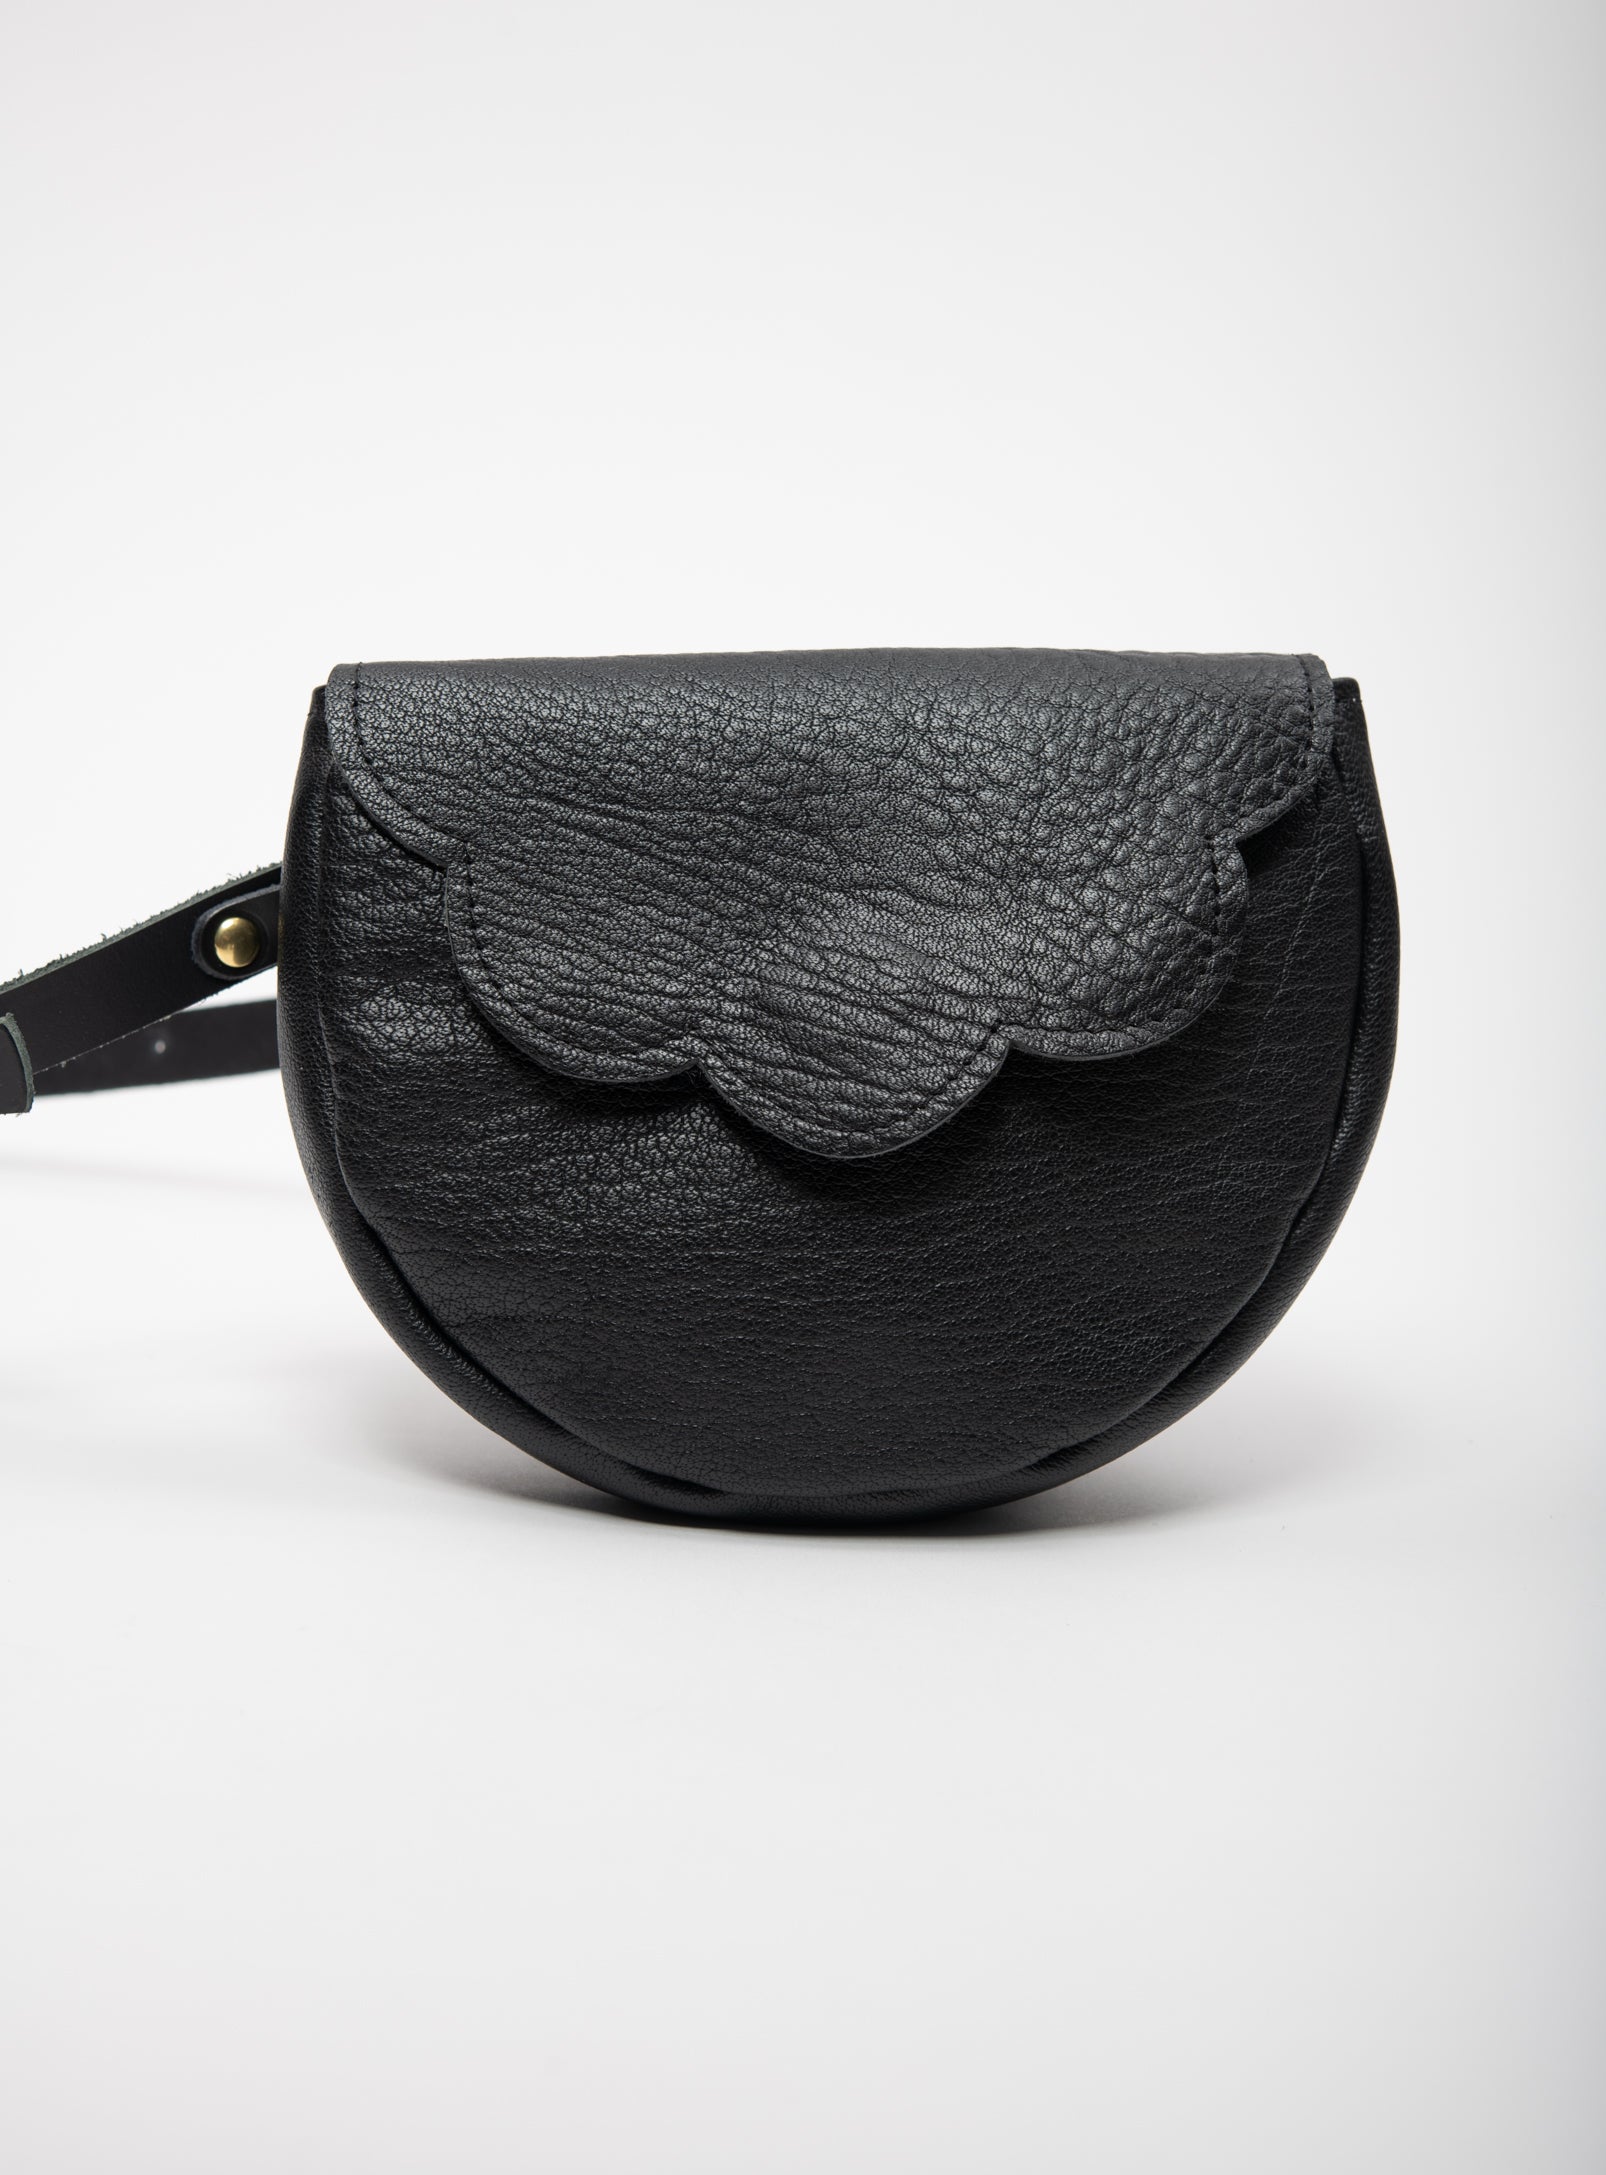 Leather bag with shoulder strap and scalloped flap PRIMULA model, all Veinage are handmade in Montreal, Canada